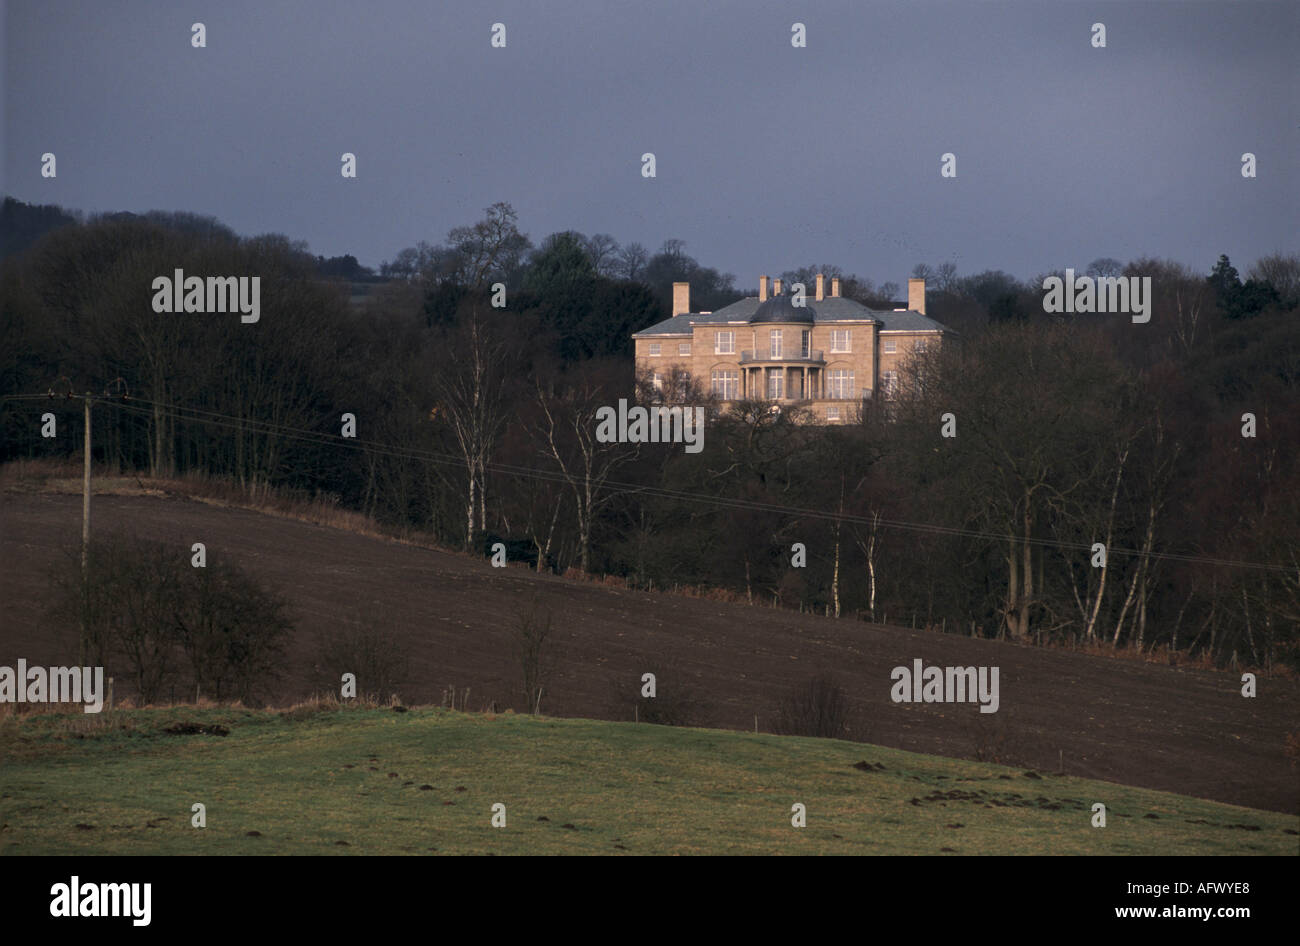 Wootton Hall a 21st century modern country mansion in Derbyshire Designed by Digby Harris and built in local sandstone 2002 2000s UK HOMER SYKES Stock Photo